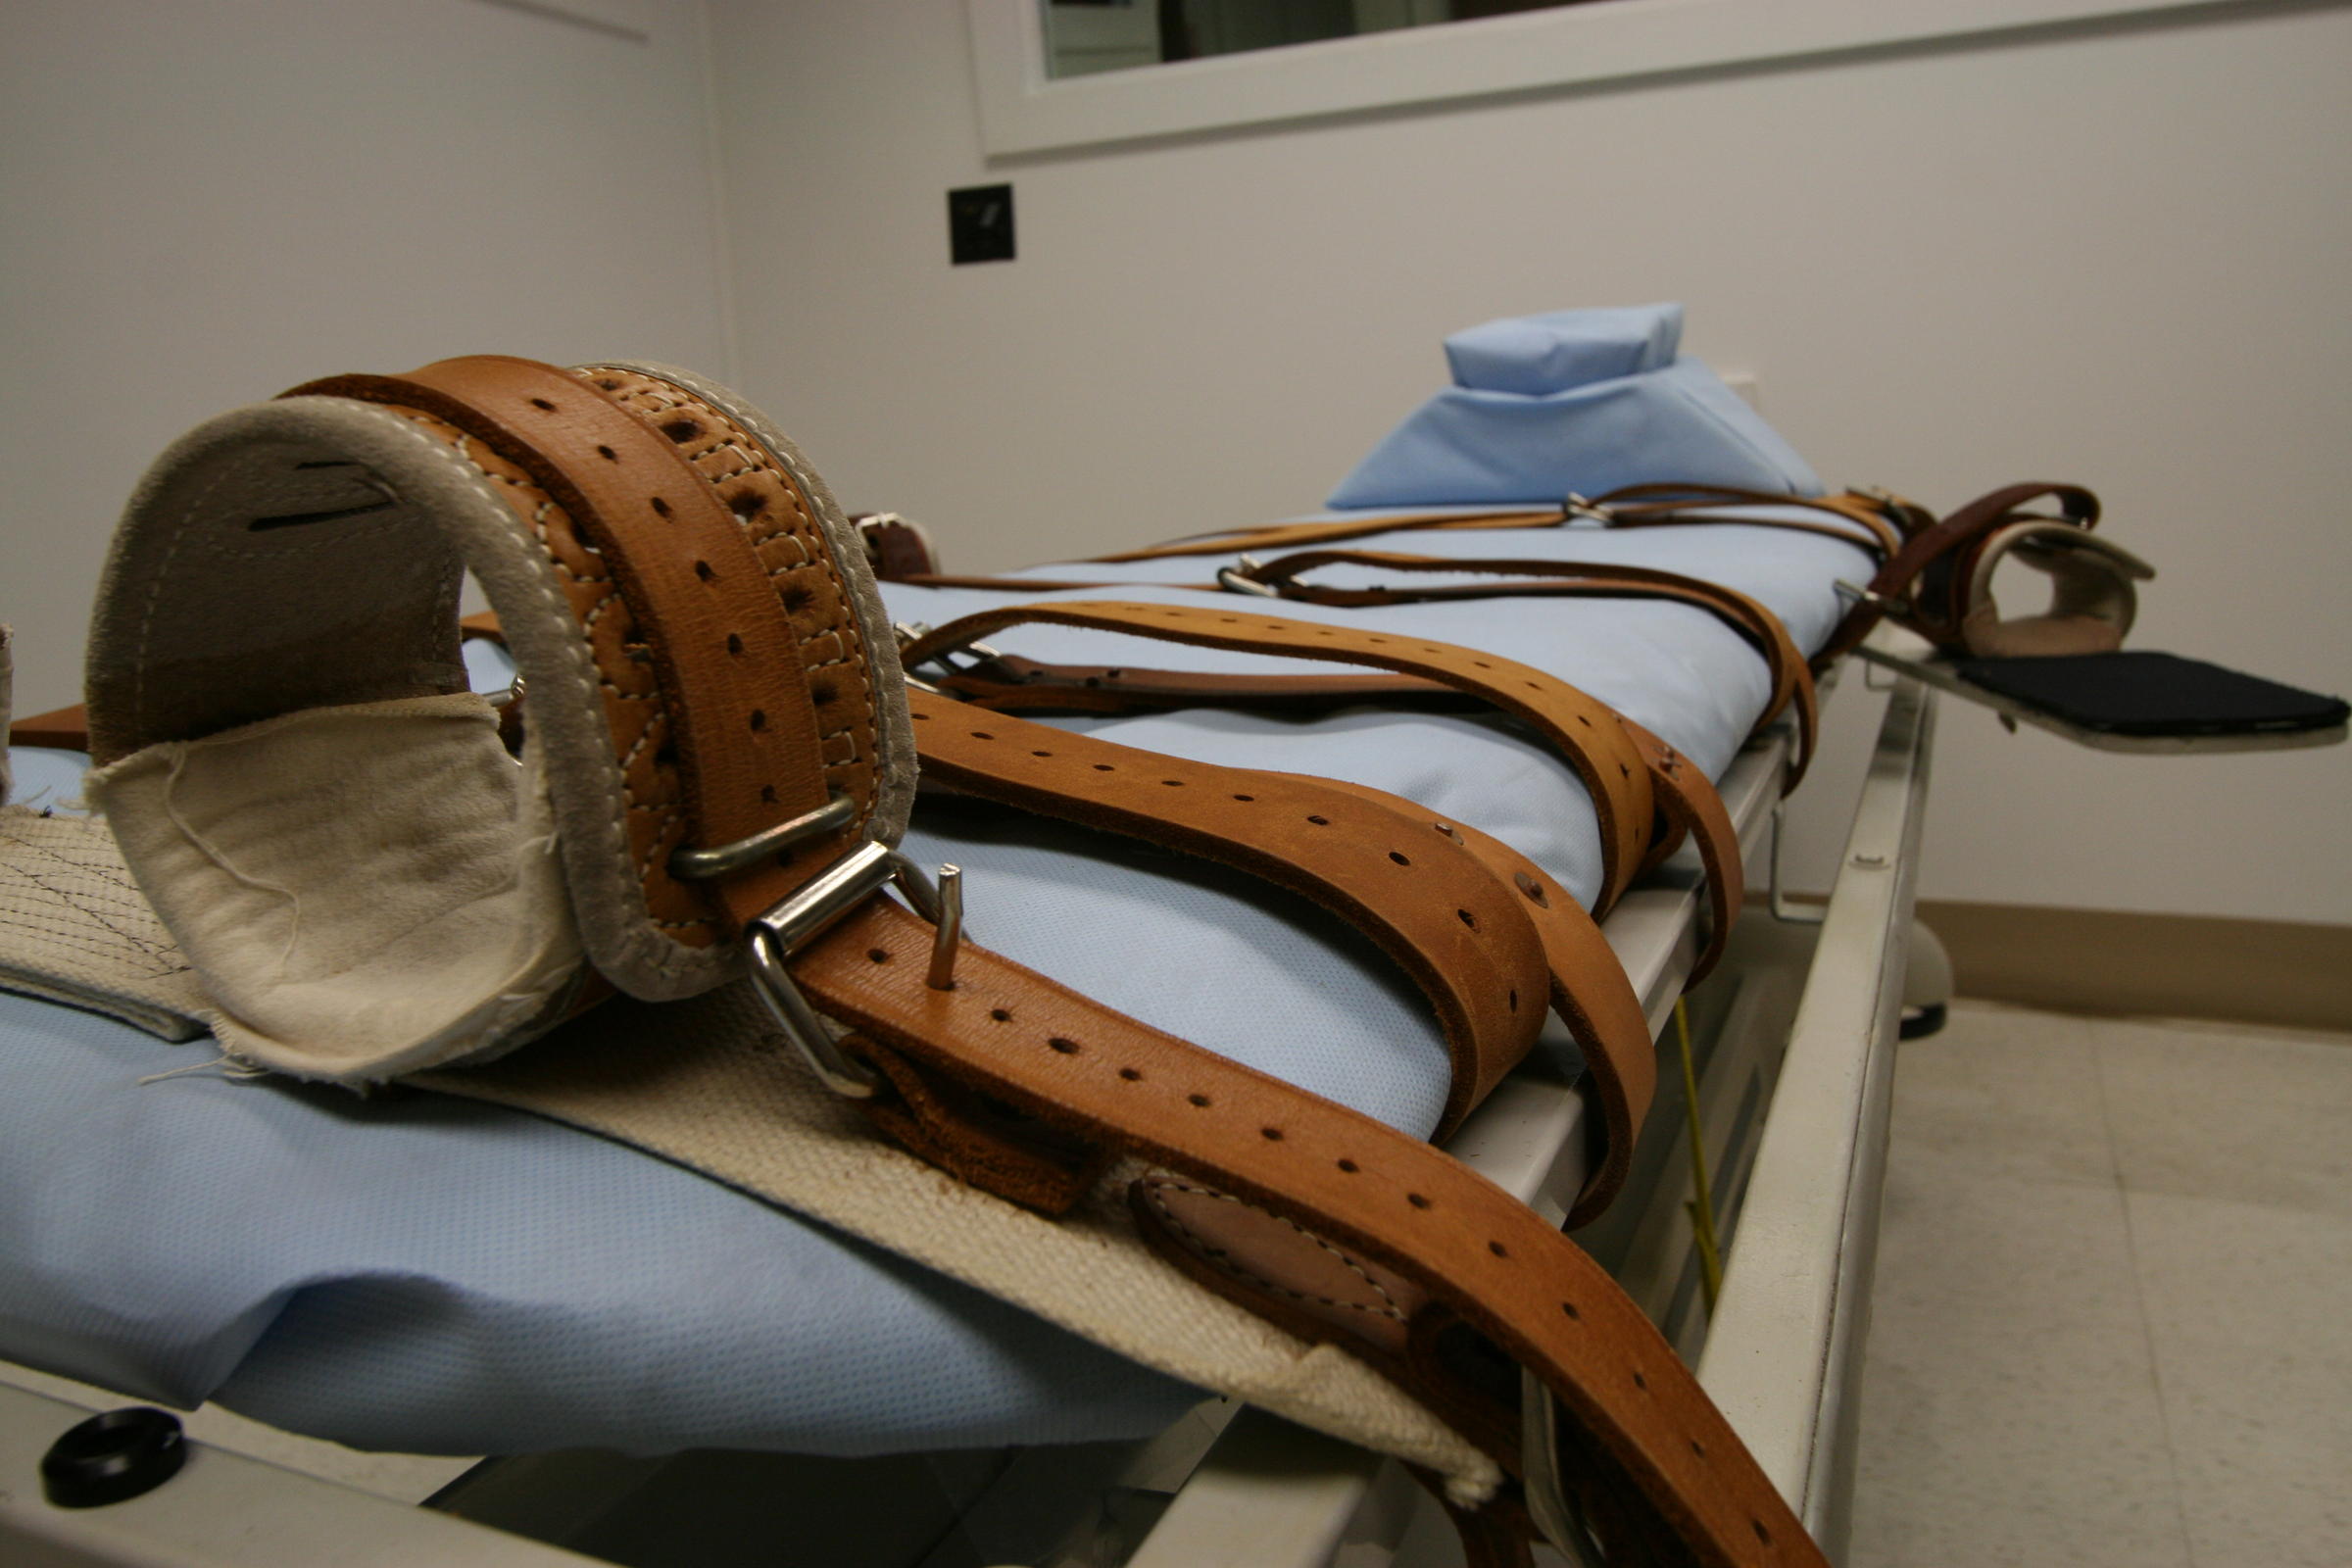 Execution delayed while lawmakers work to fix system